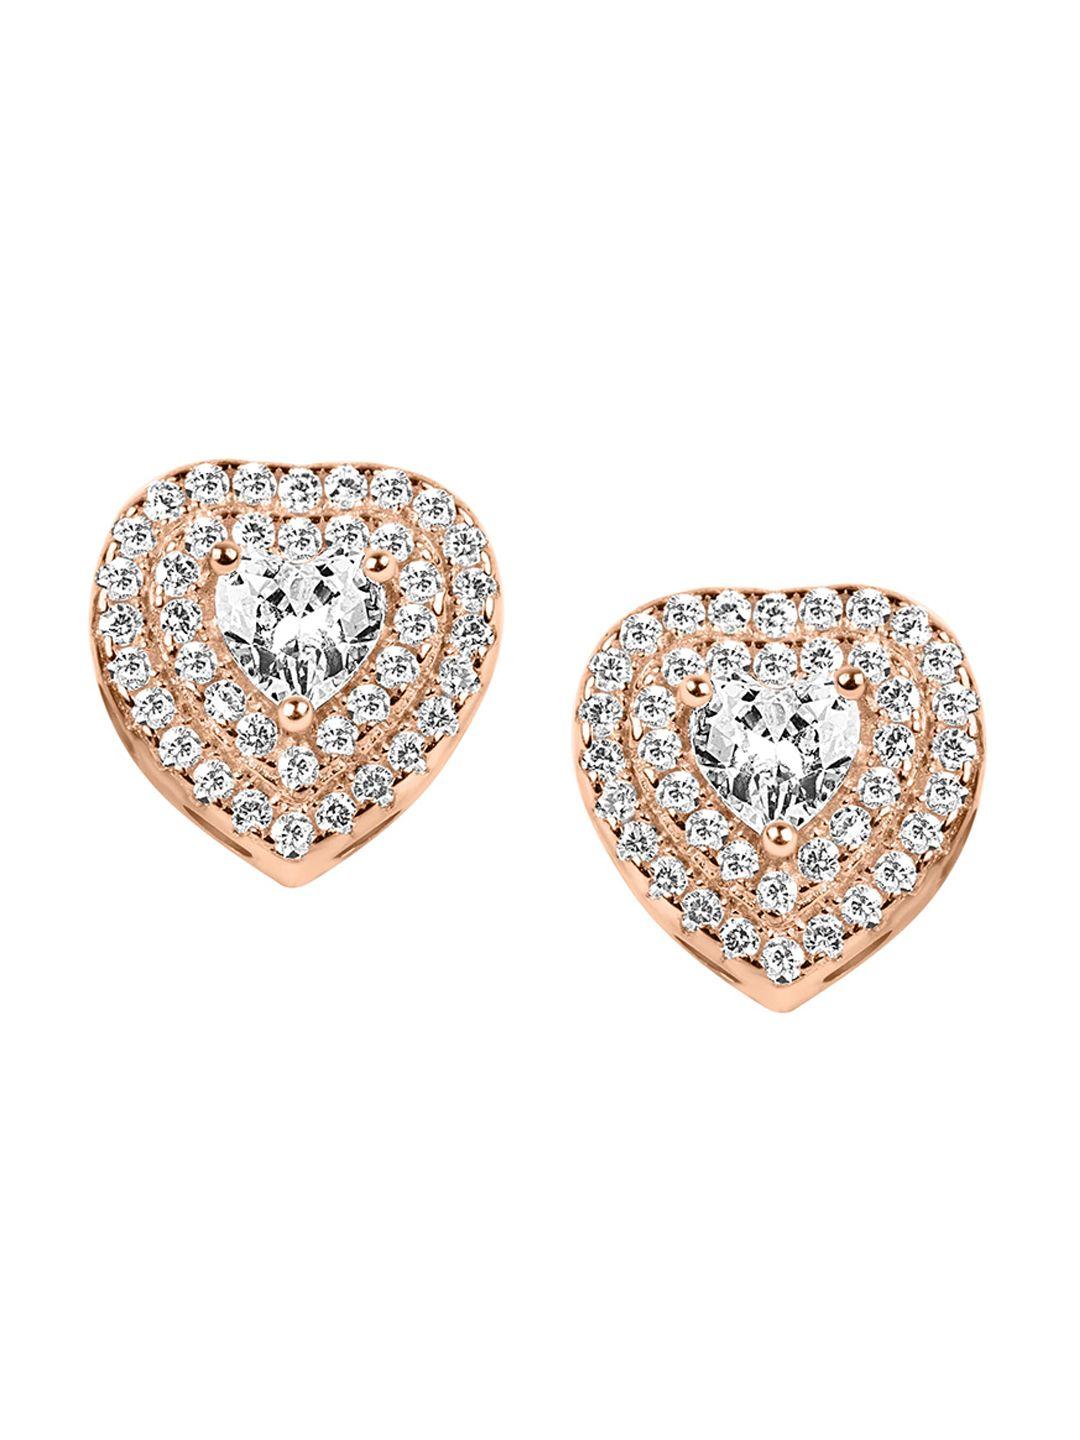 925 siller contemporary sterling silver studs earrings